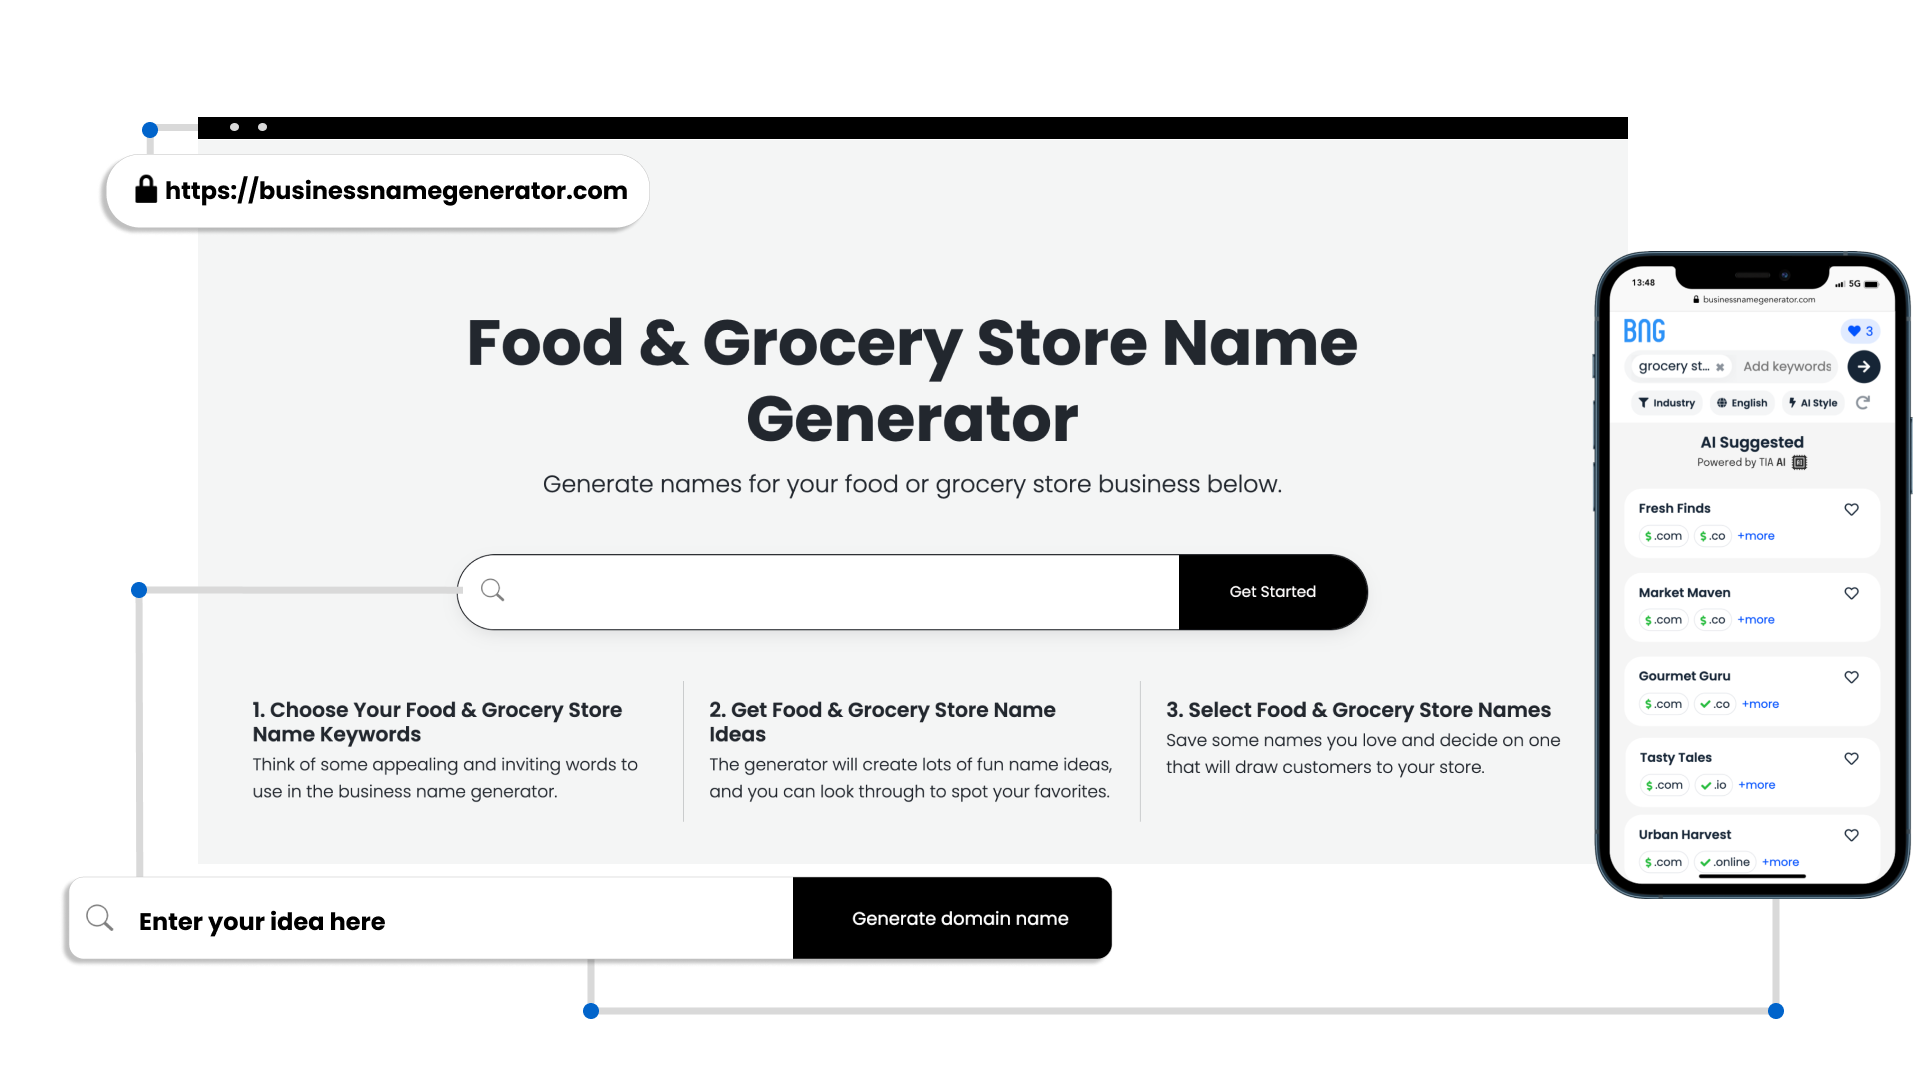 How to use our Food and Grocery Business Name Generator